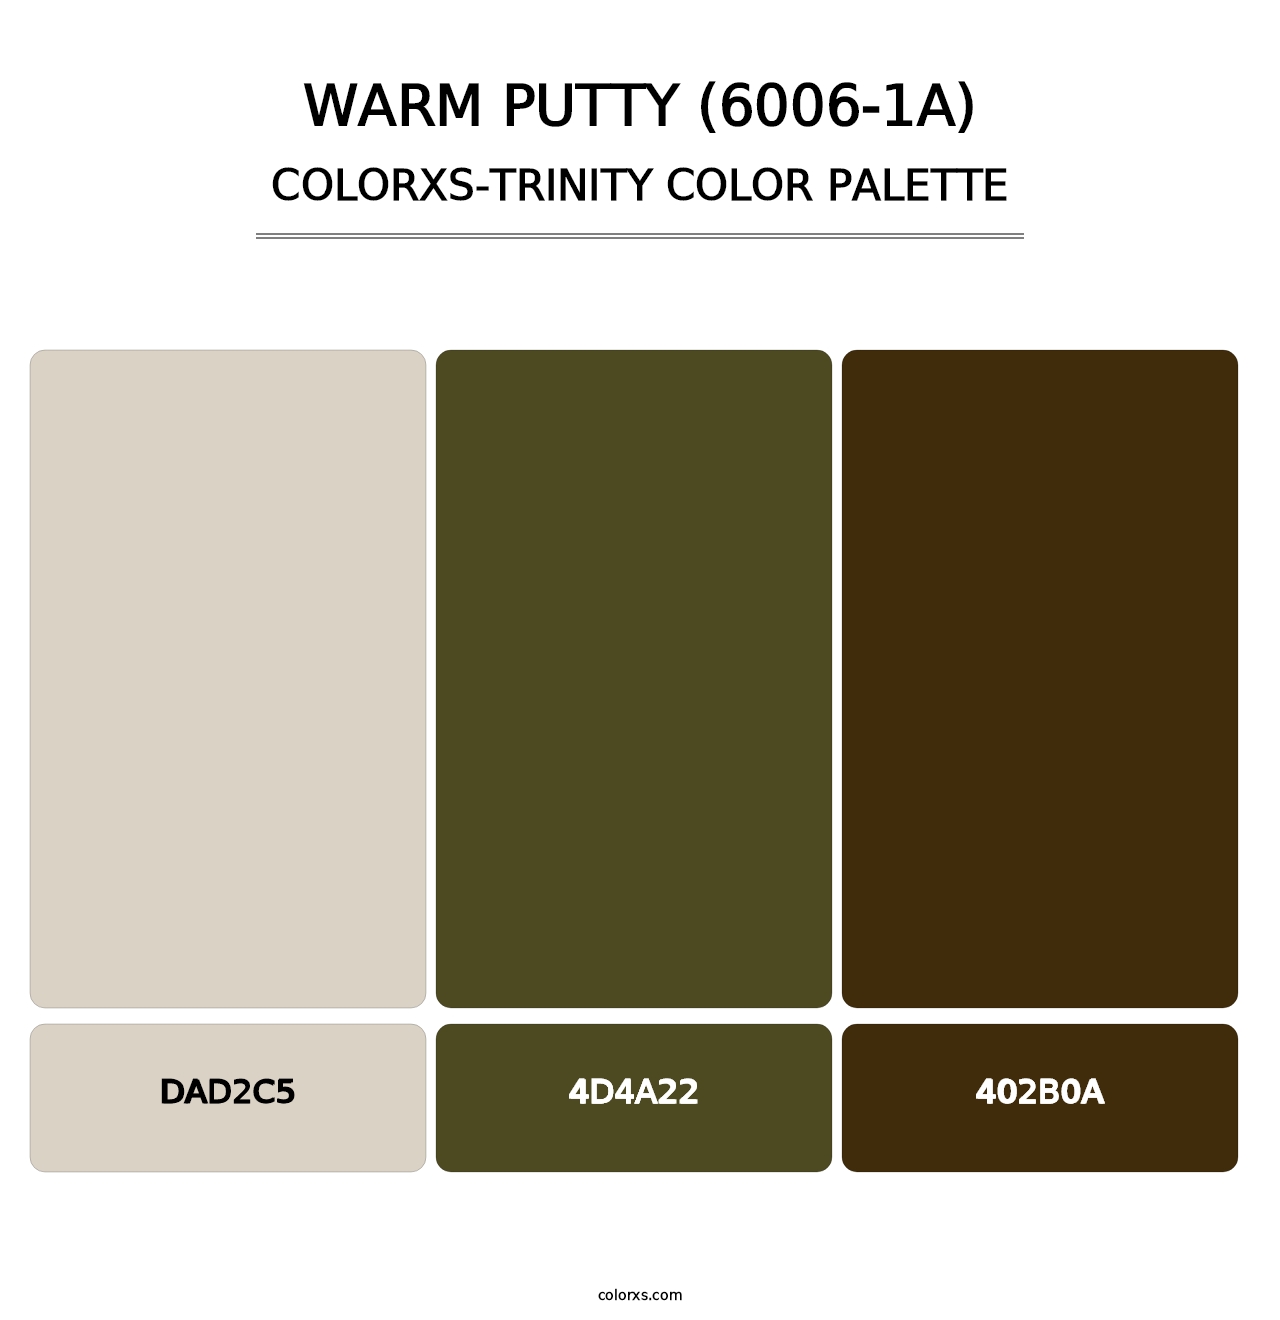 Warm Putty (6006-1A) - Colorxs Trinity Palette